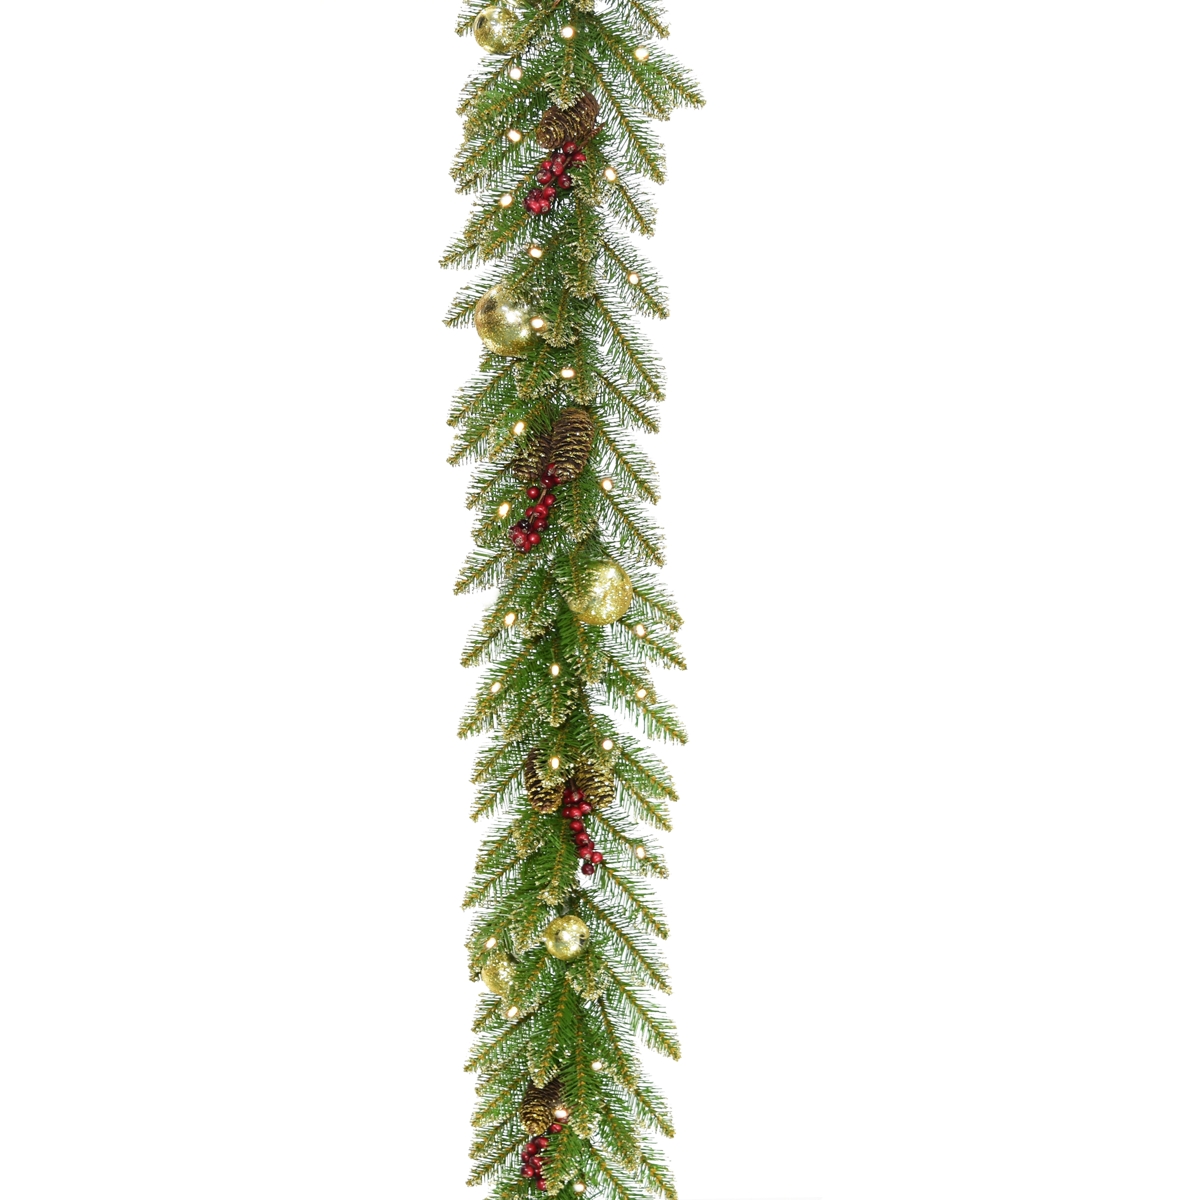 9'x 10" Glittery Gold Dunhill Fir Garland w/ Red Berries, Gold Edged Cones, Gold Ornaments & Warm White Battery Operated Led Lig